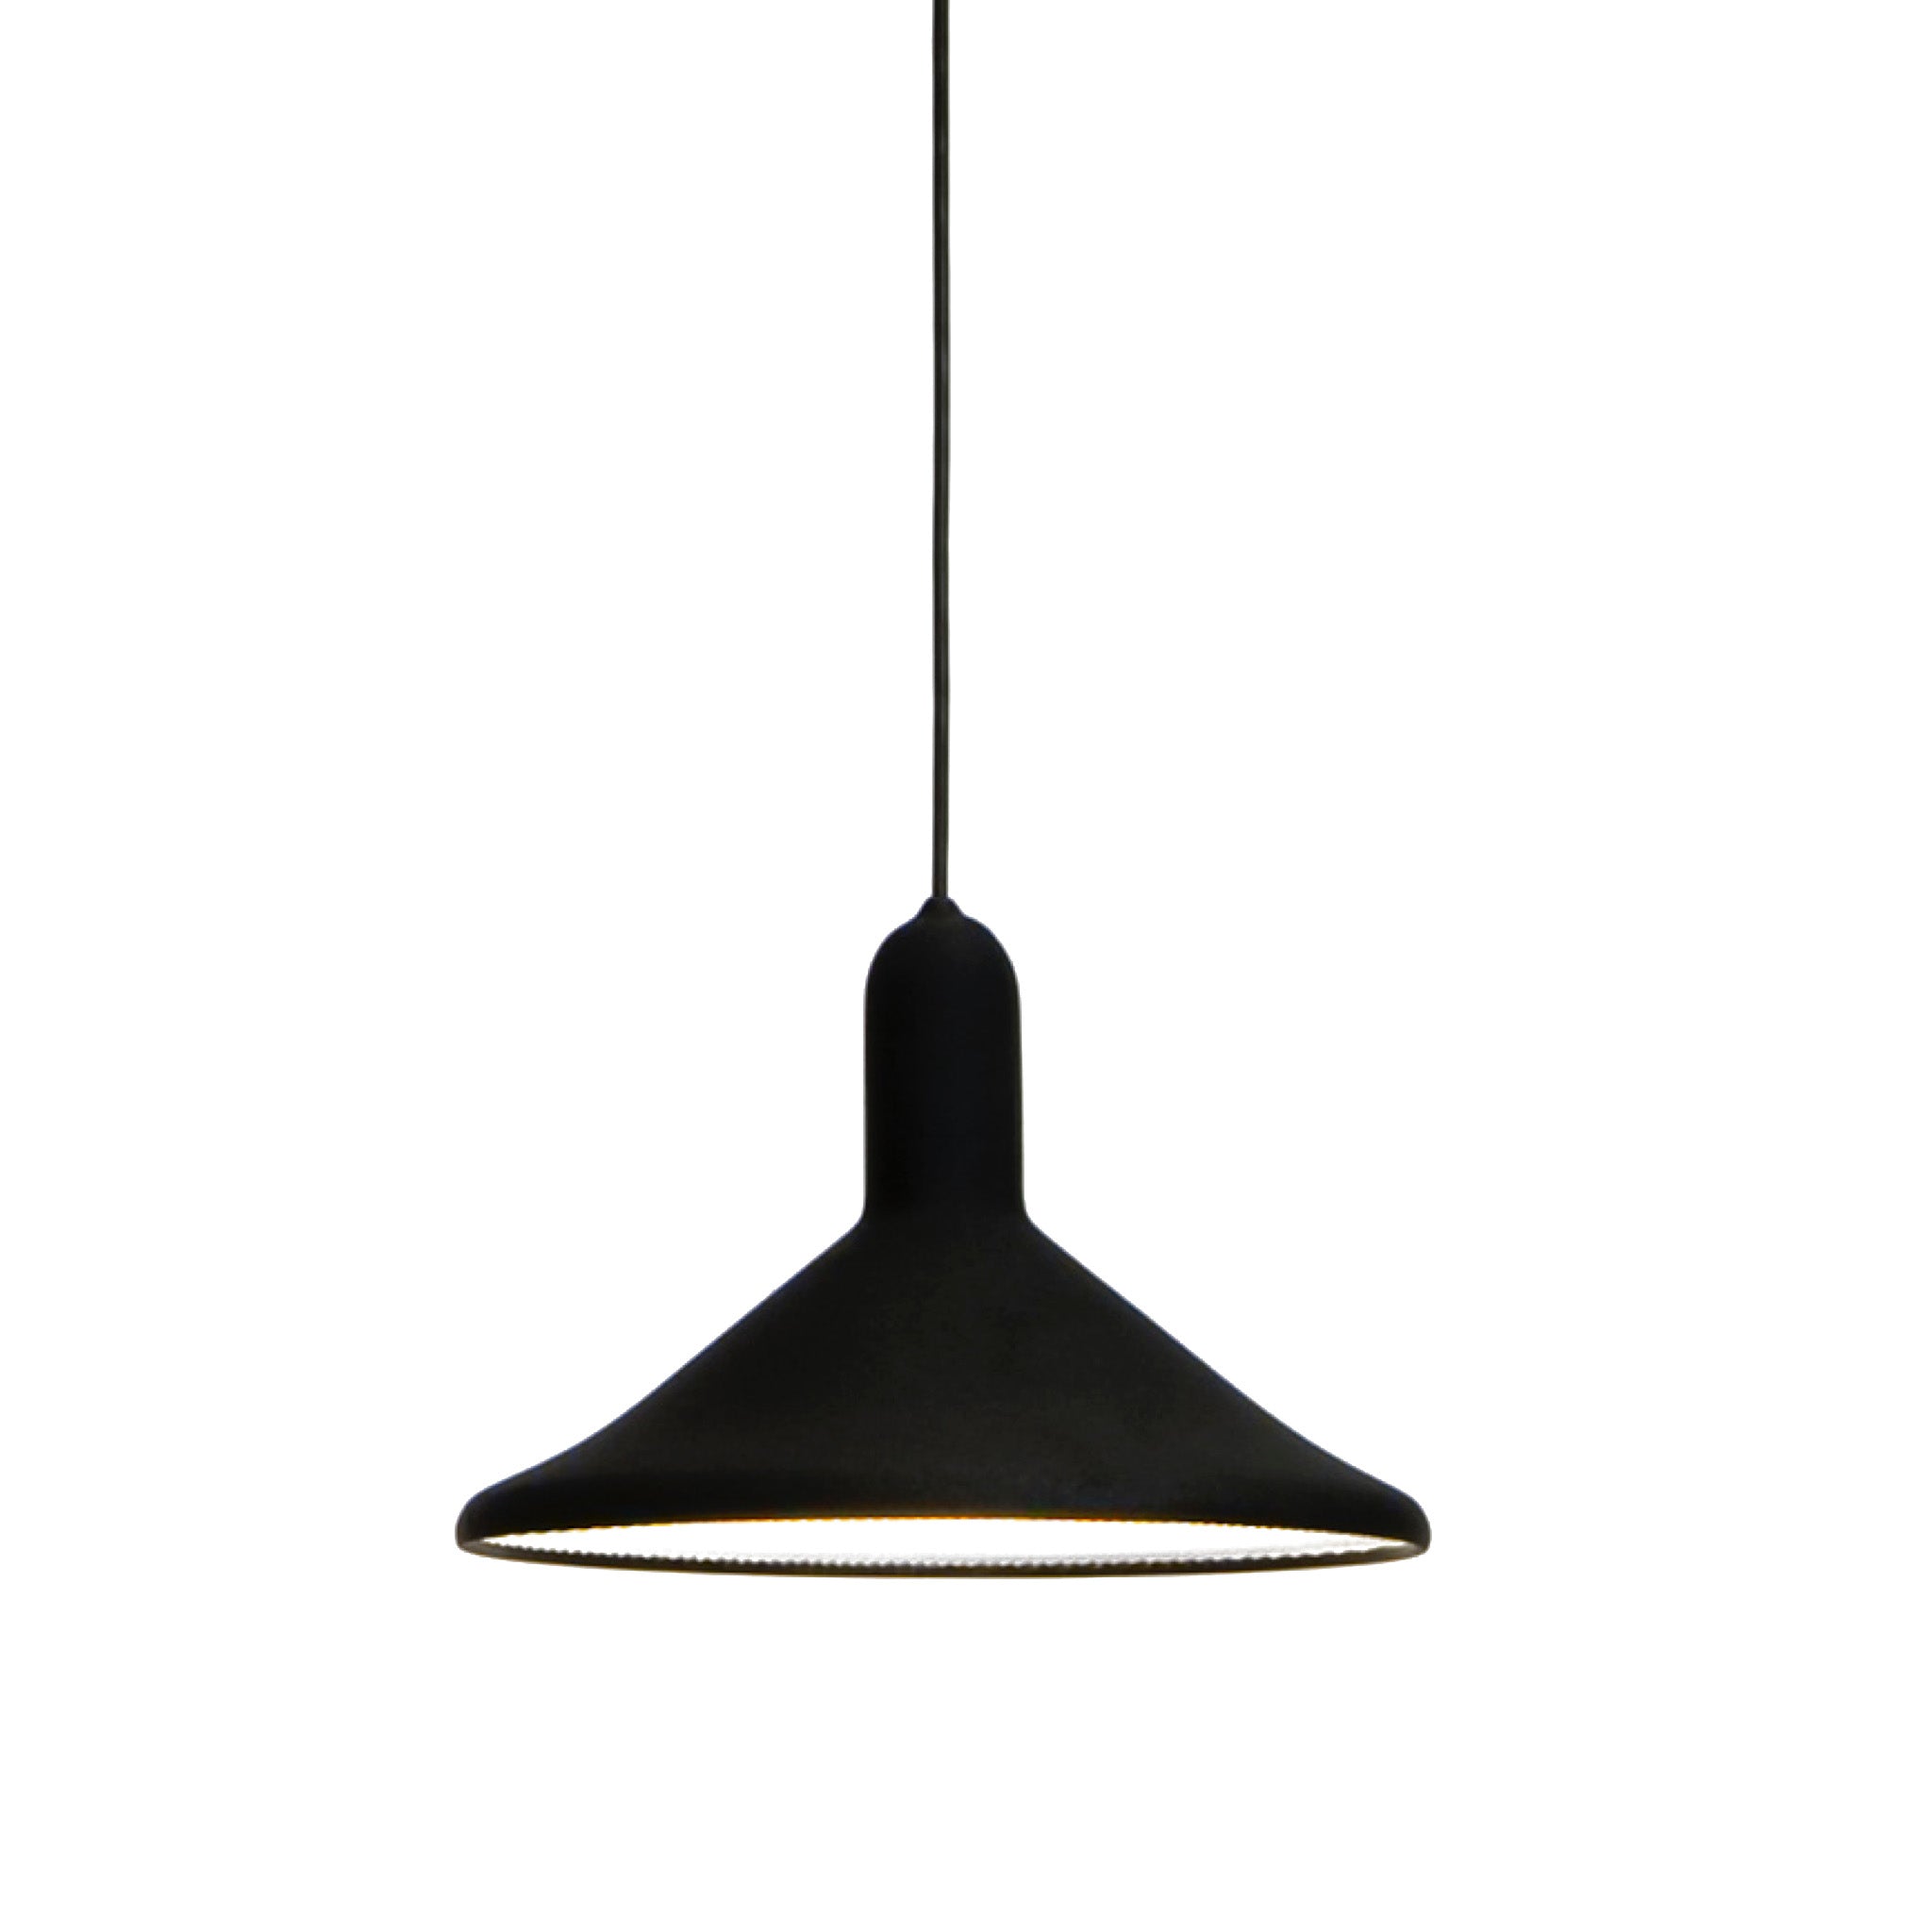 Clearance Torch Light Suspension / S3 Large Cone / Black with Black Cable by Established & Sons